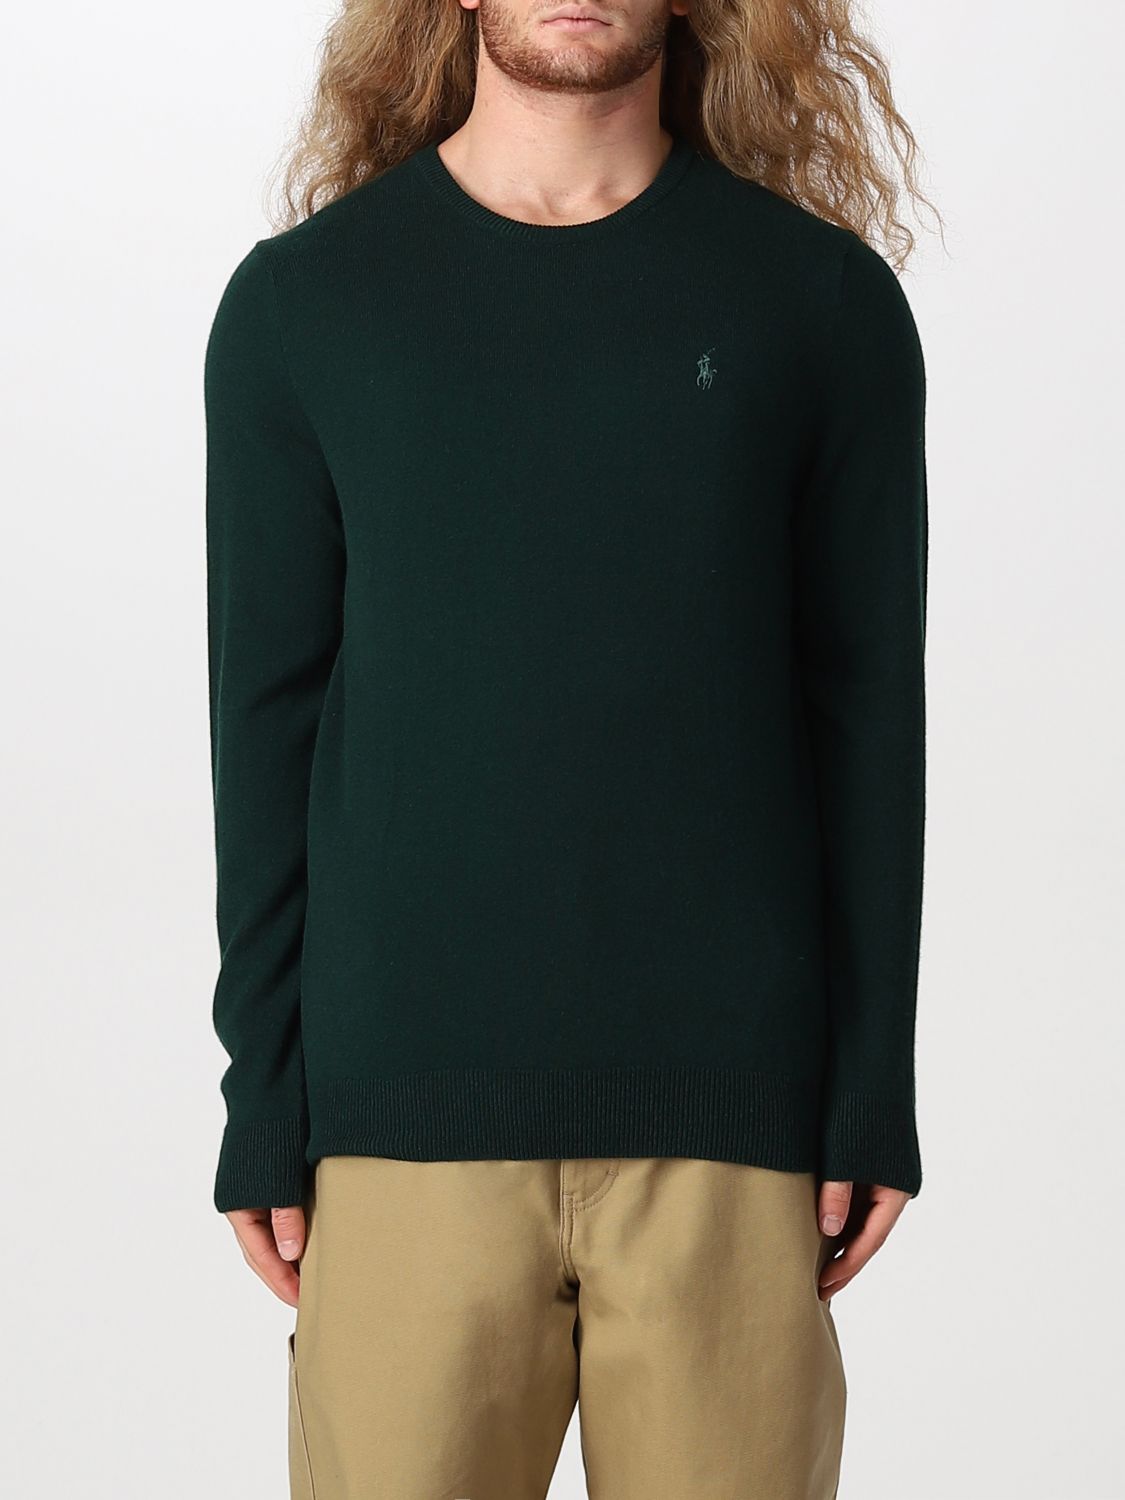 Polo Ralph Lauren Outlet: sweater for man - Green | Polo Ralph Lauren  sweater 710876714 online on 